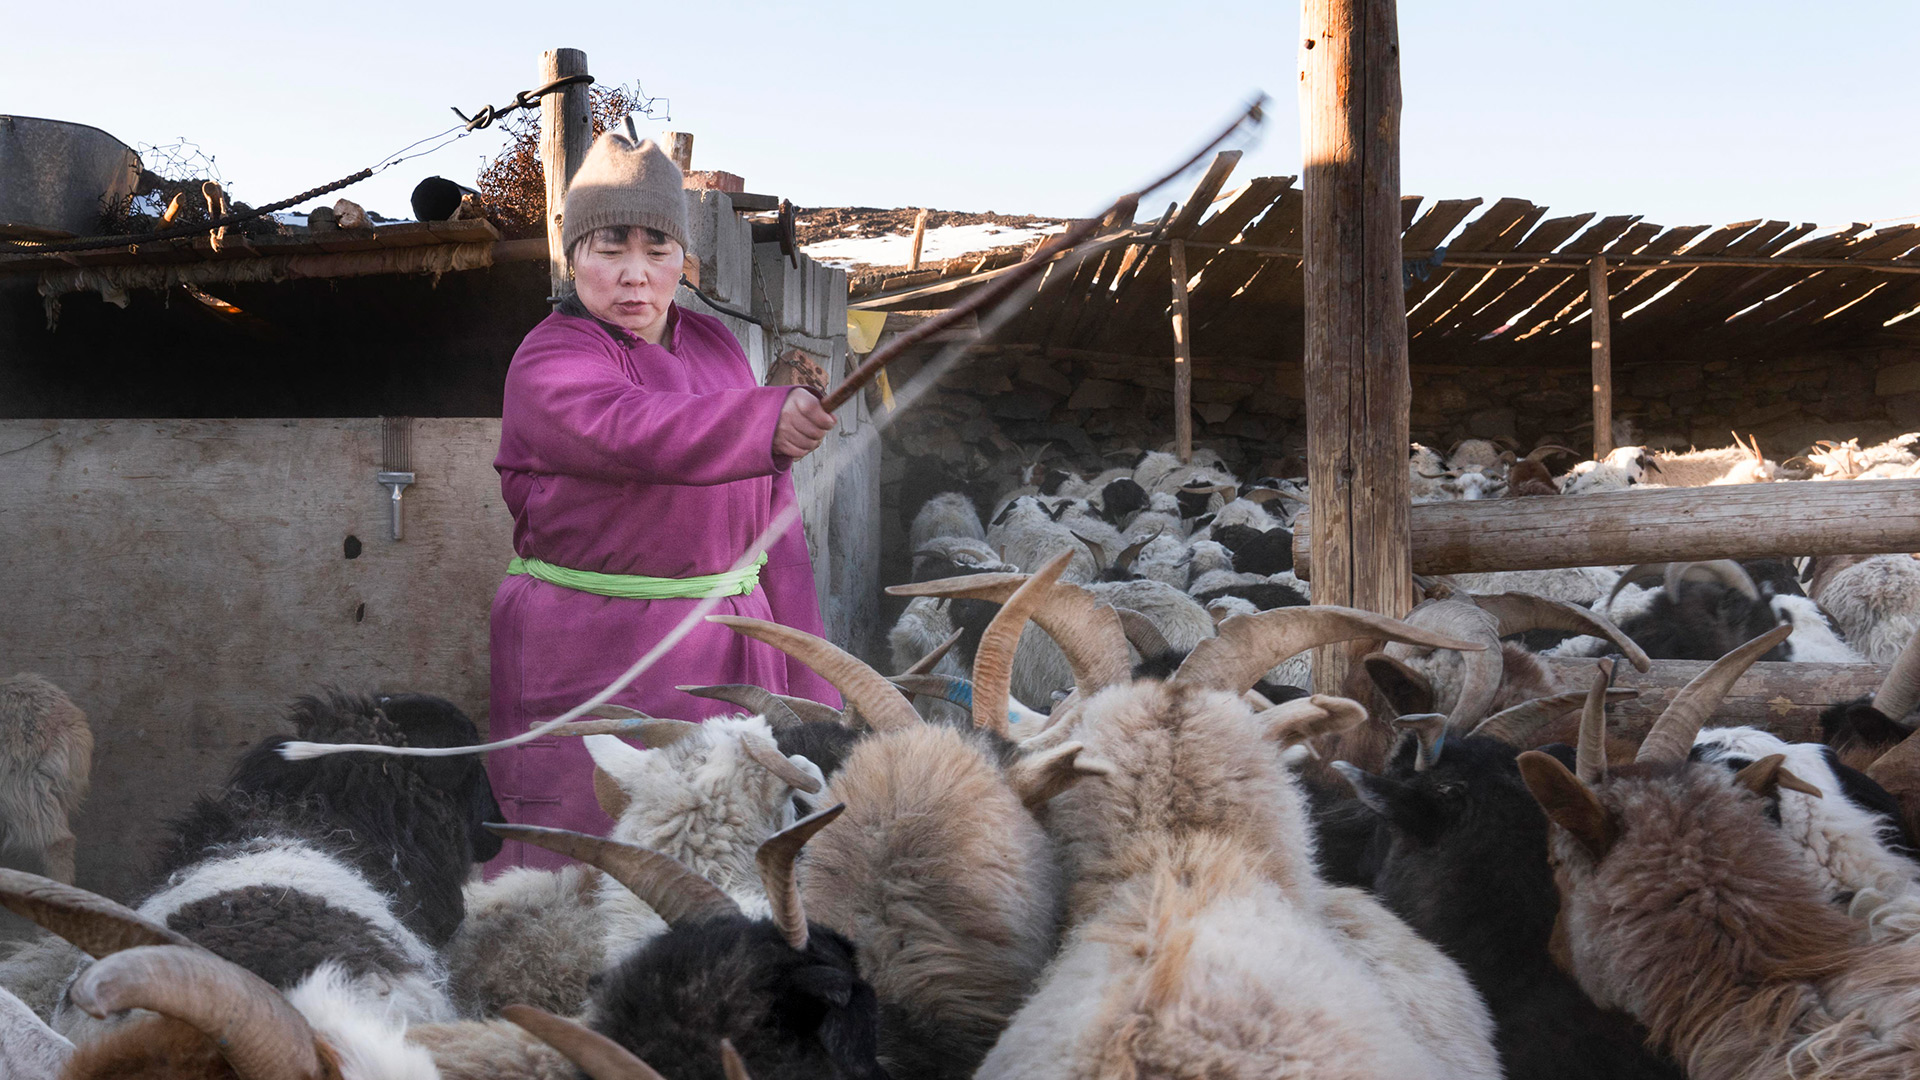 Goats and herder, Mongolia